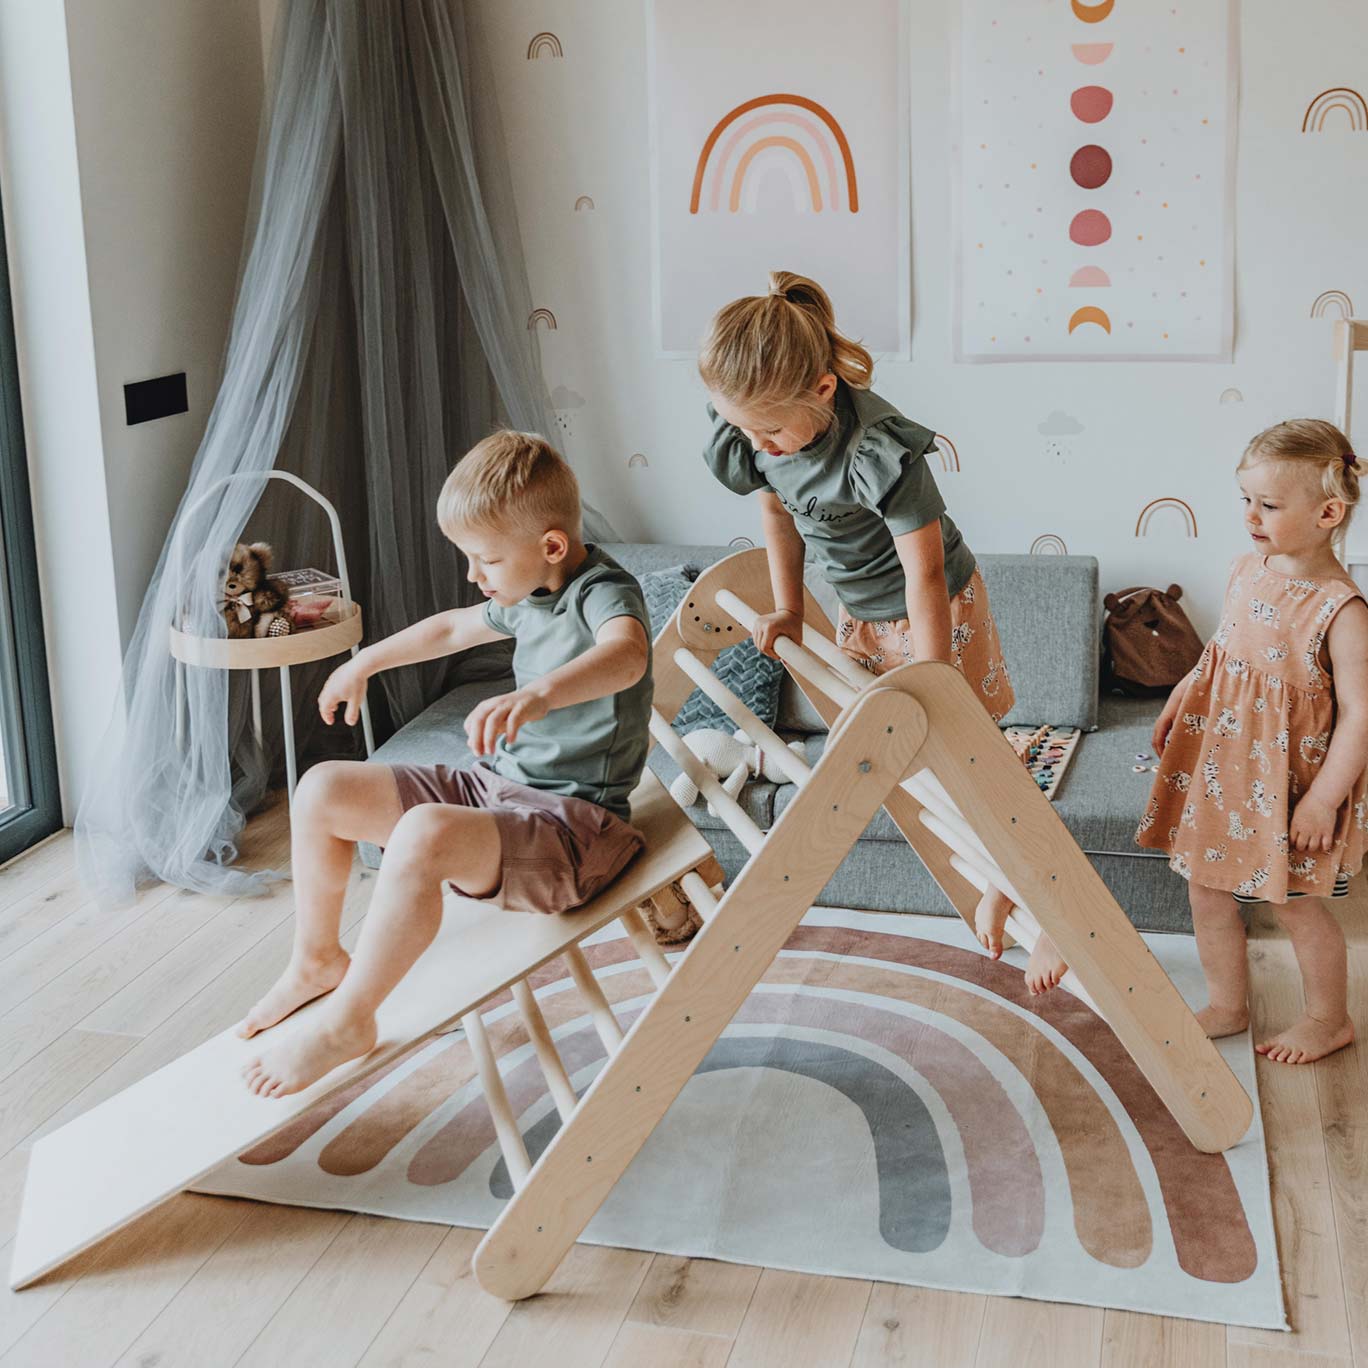 Three children playing on a wooden slide in a living room.